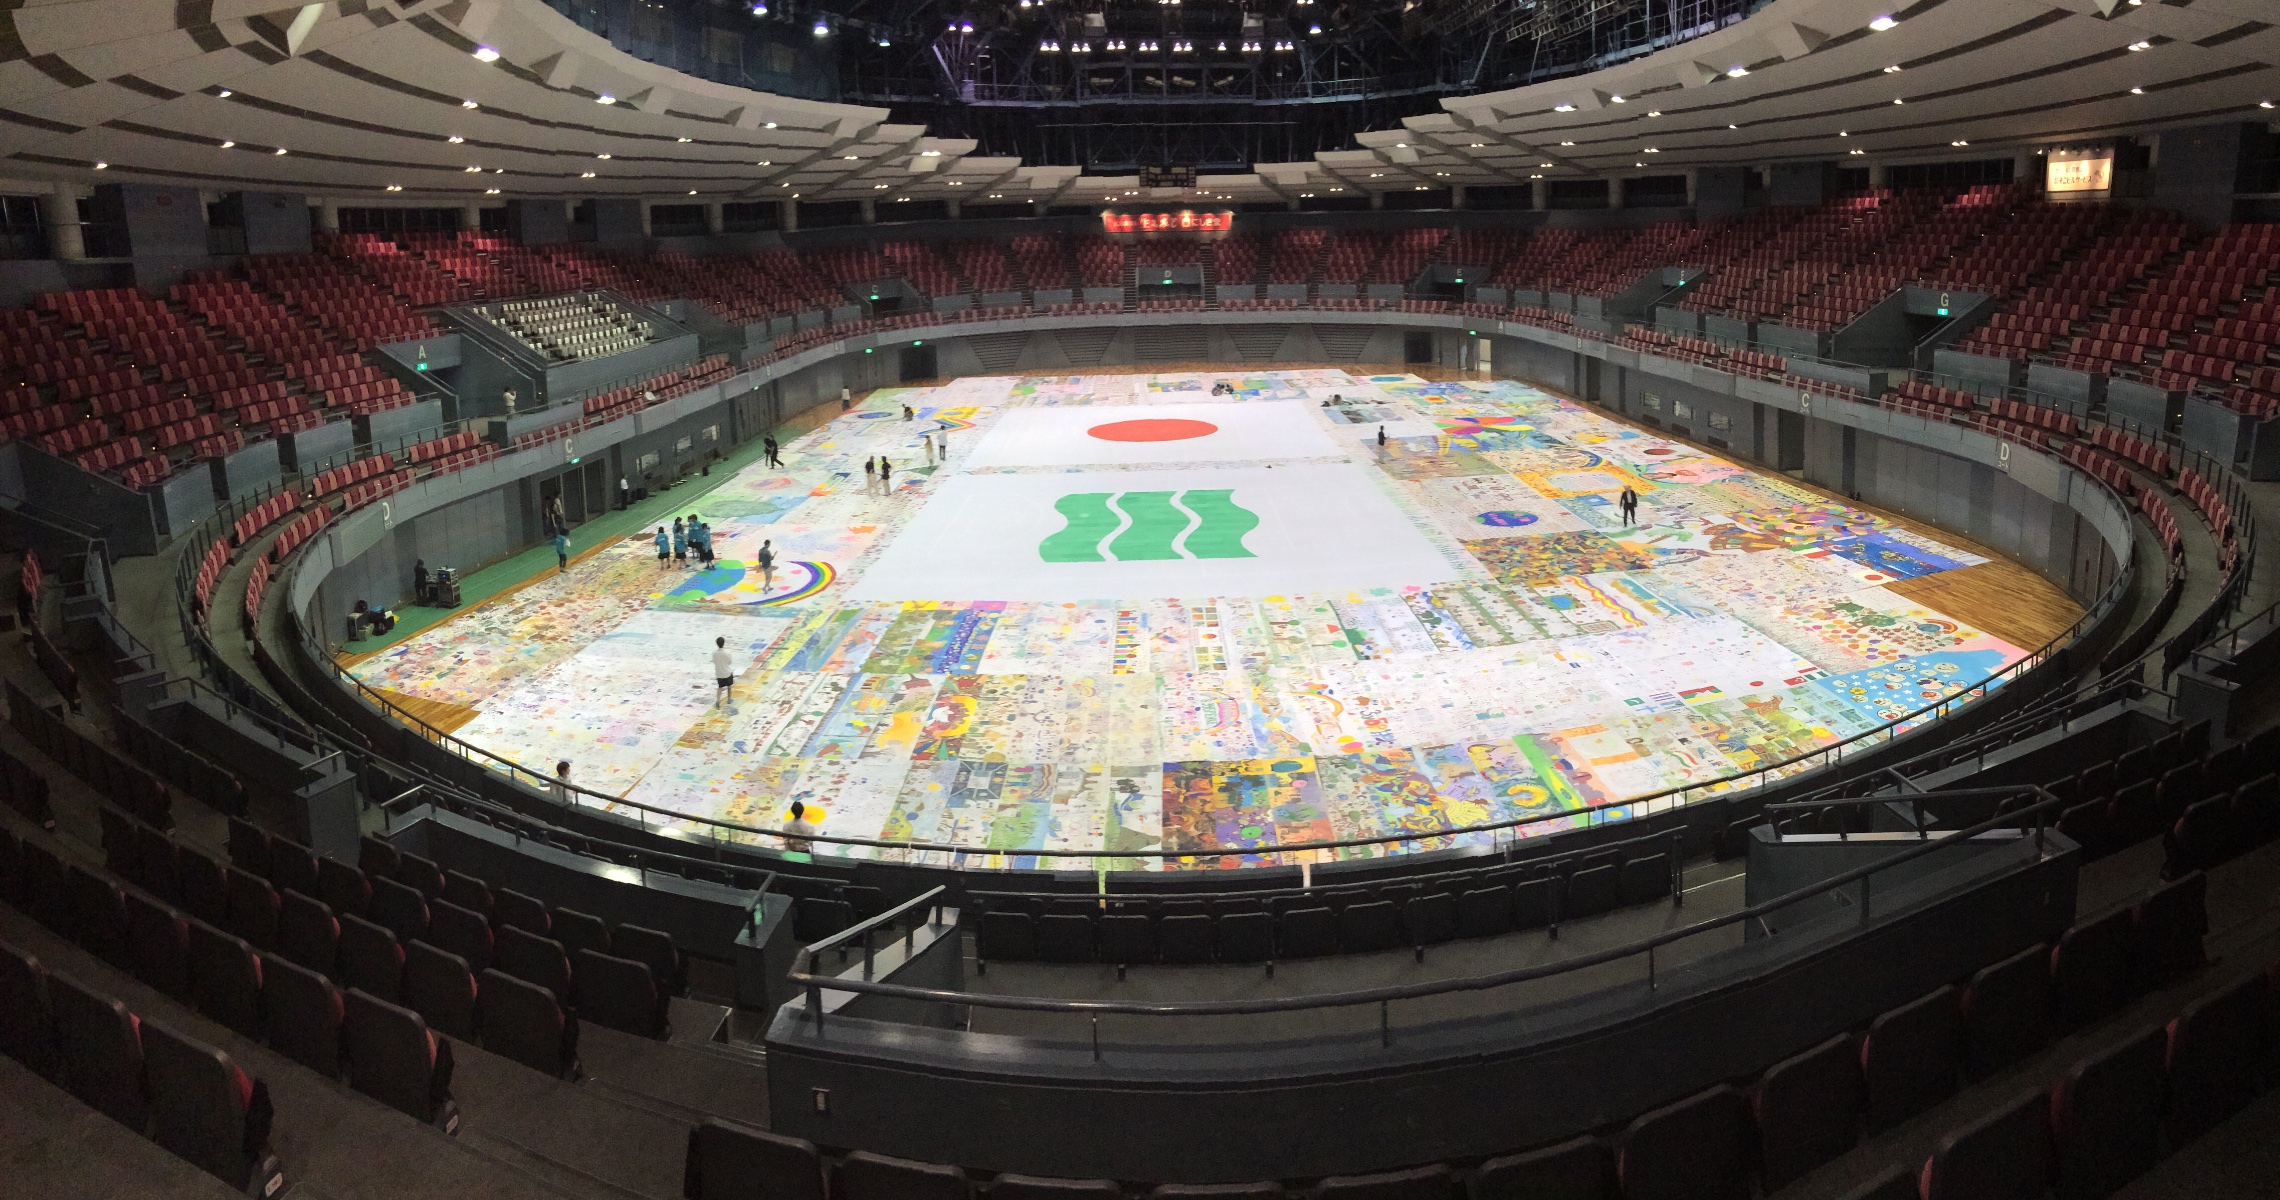 We held "THE BIGGEST PAINTING IN THE WORLD 2015 70th Anniversary of A-bomb in Hiroshima" in Hiroshima Green Arena.